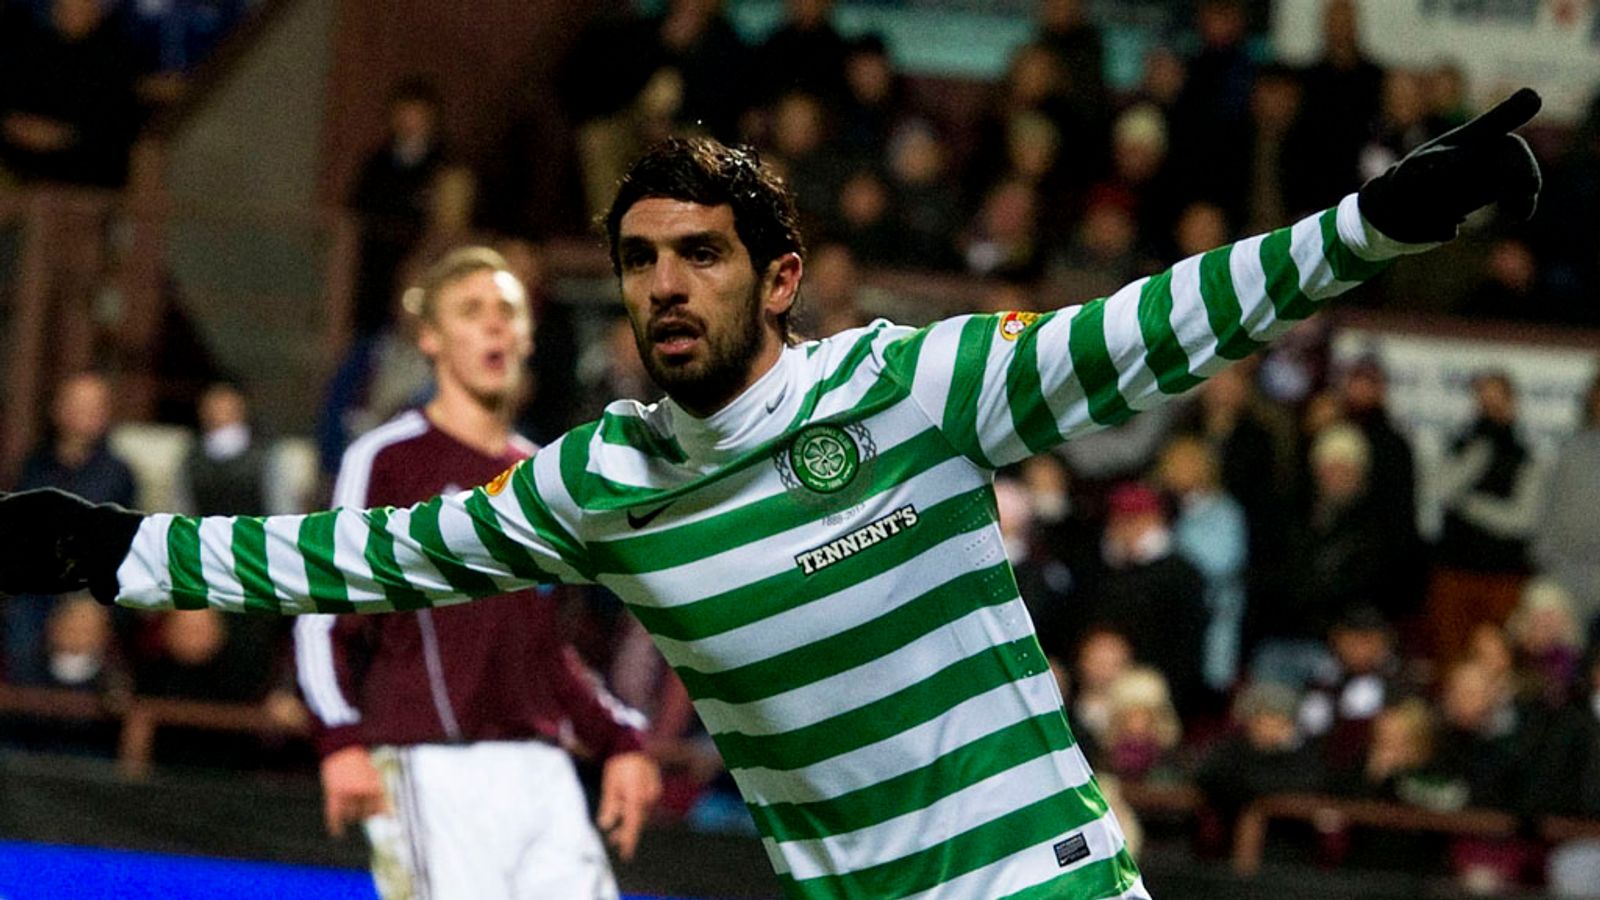 Hearts 0 - 4 Celtic - Match Report & Highlights1600 x 900